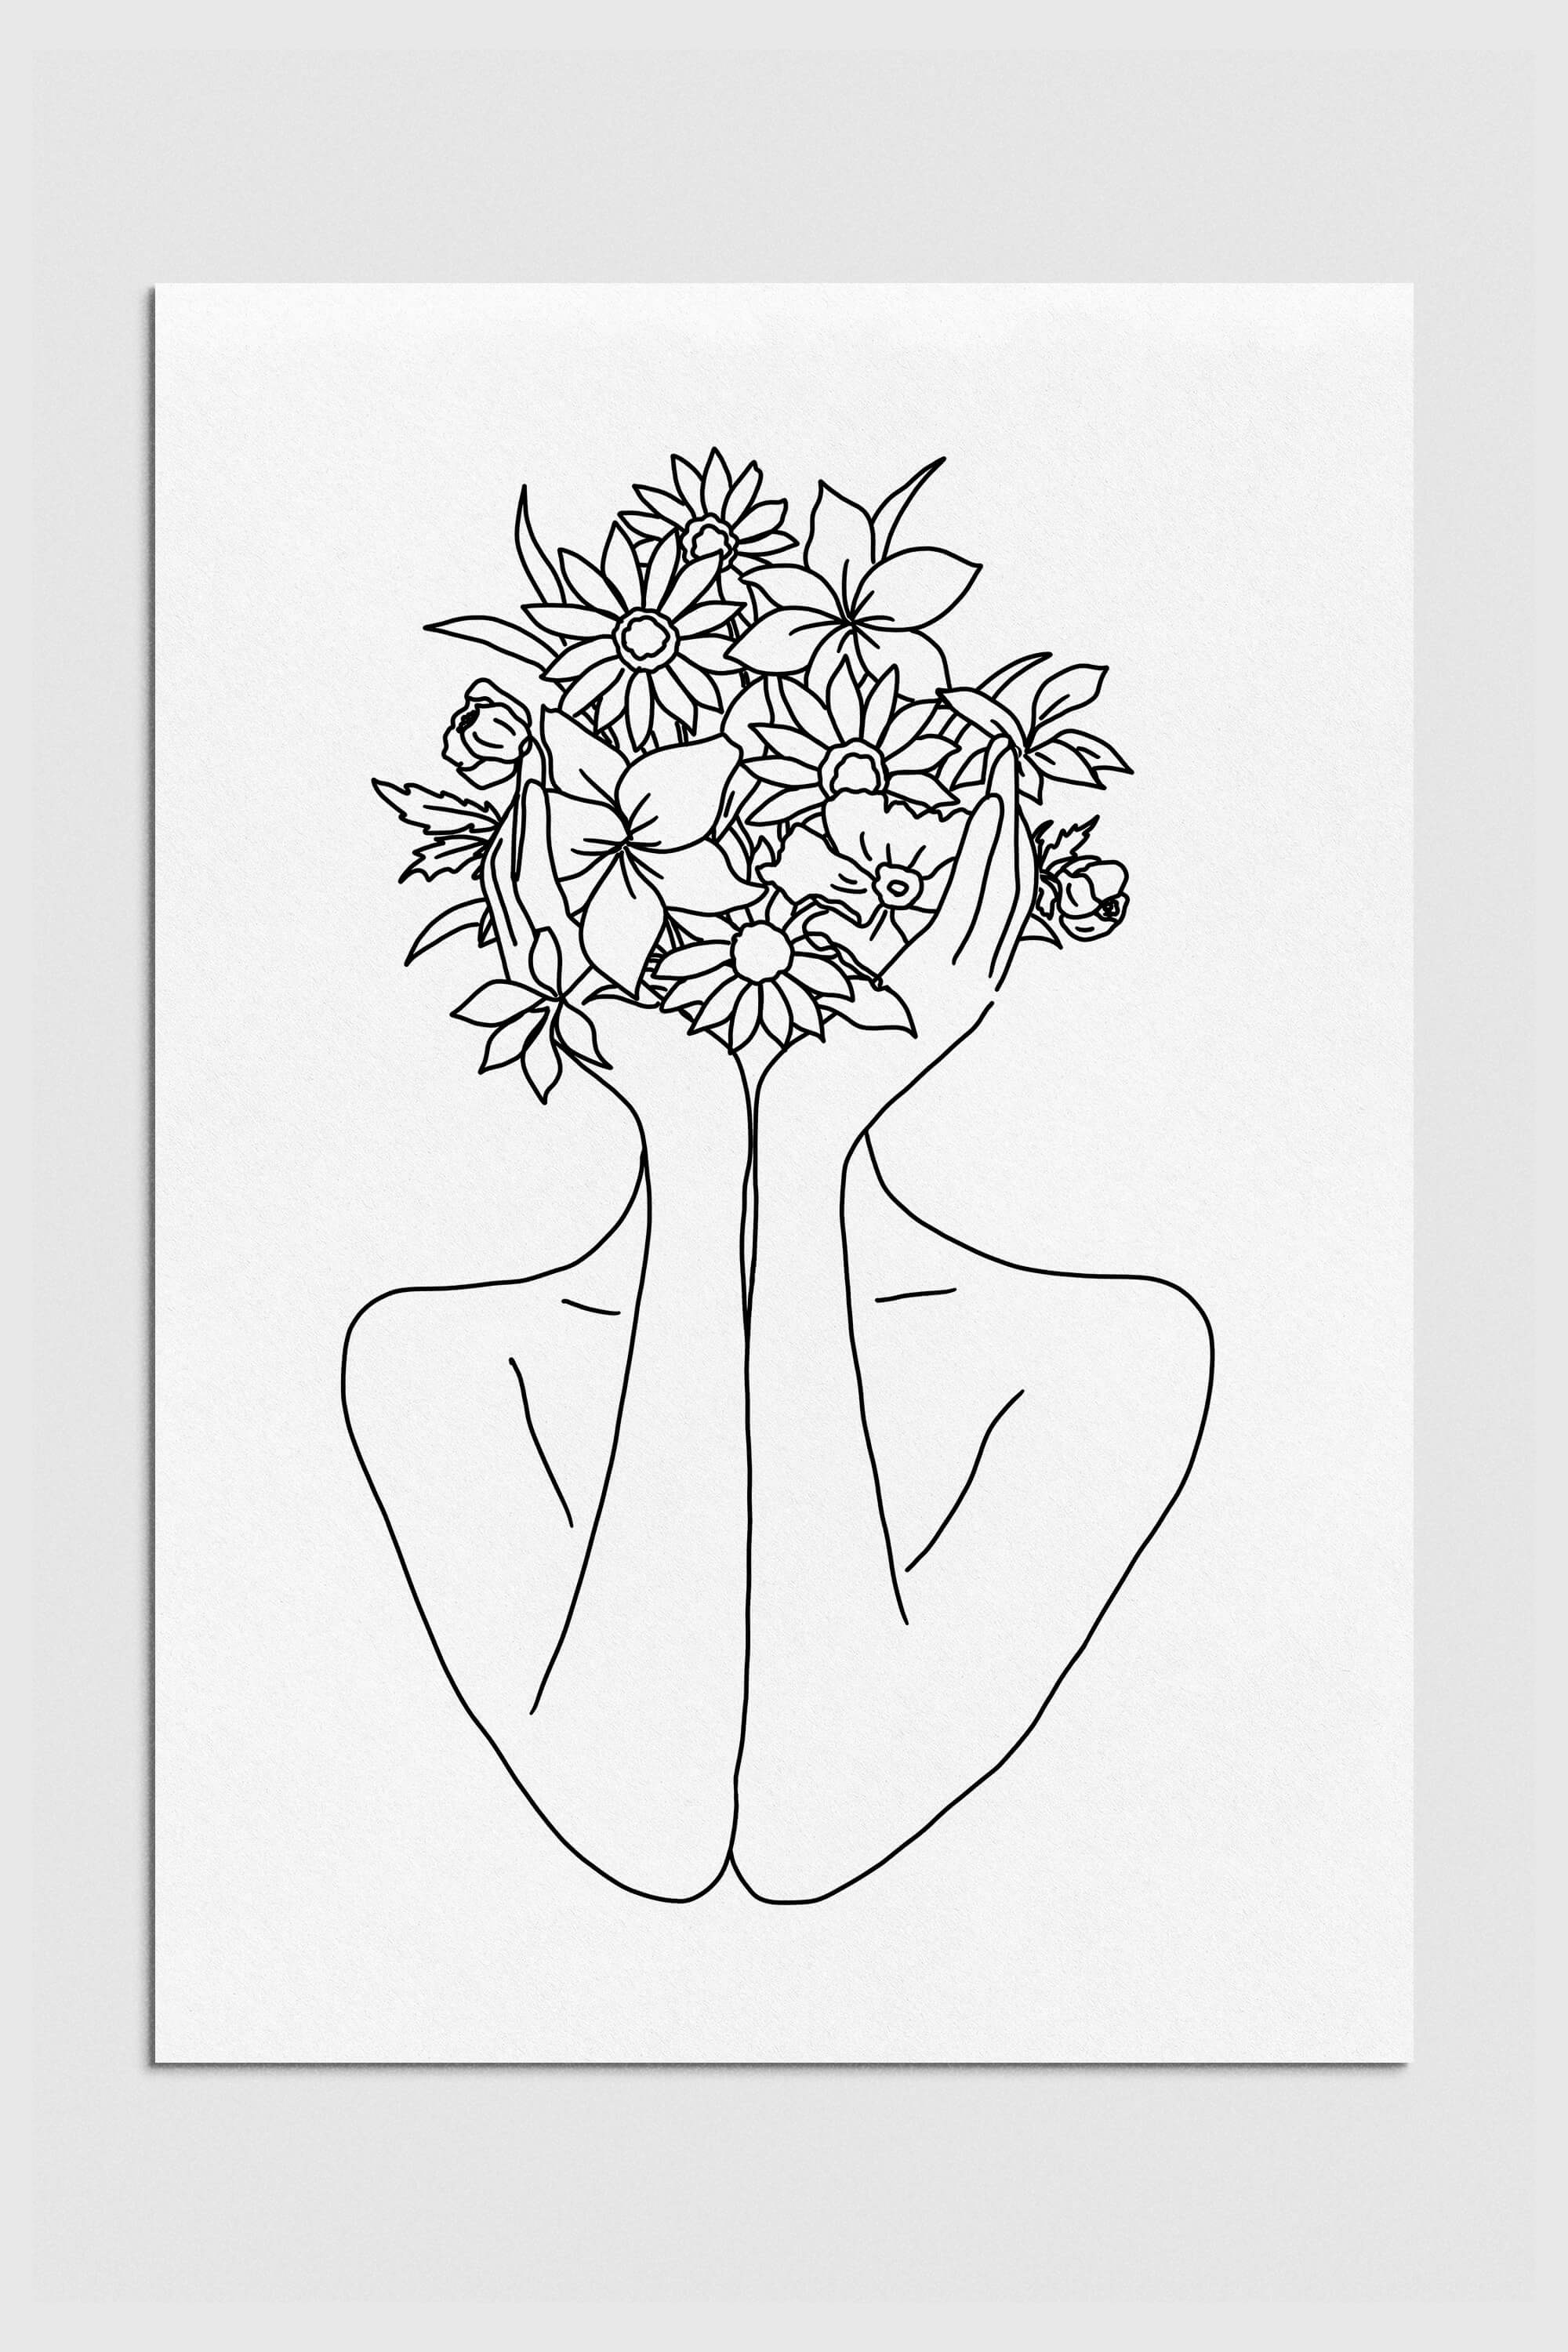 Abstract beauty captured in a black and white line art print of a woman with a flower head. The intricate lines evoke a sense of modern elegance and nature-inspired art.